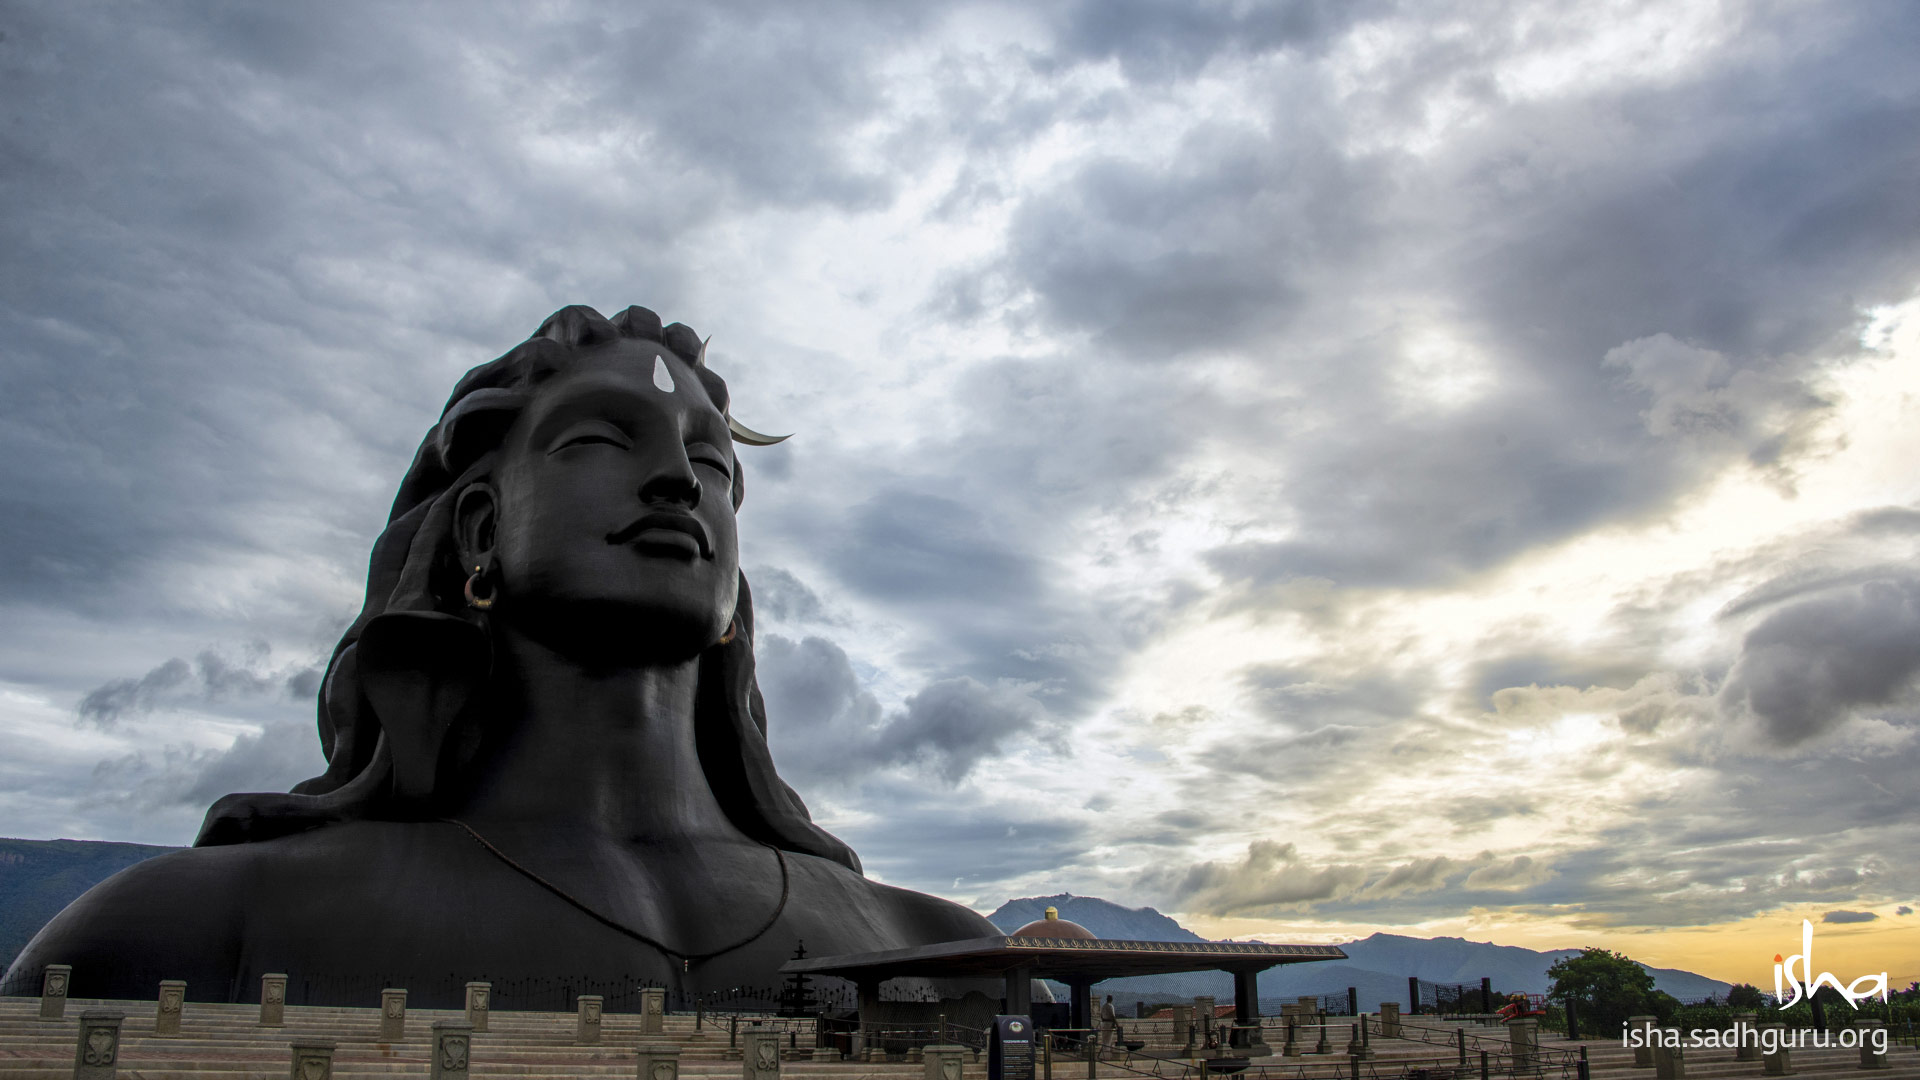 60 Shiva Adiyogi Wallpapers Hd Free Download For Mobile And Desktop Feel free to download, share, comment and discuss every wallpaper you like. 60 shiva adiyogi wallpapers hd free